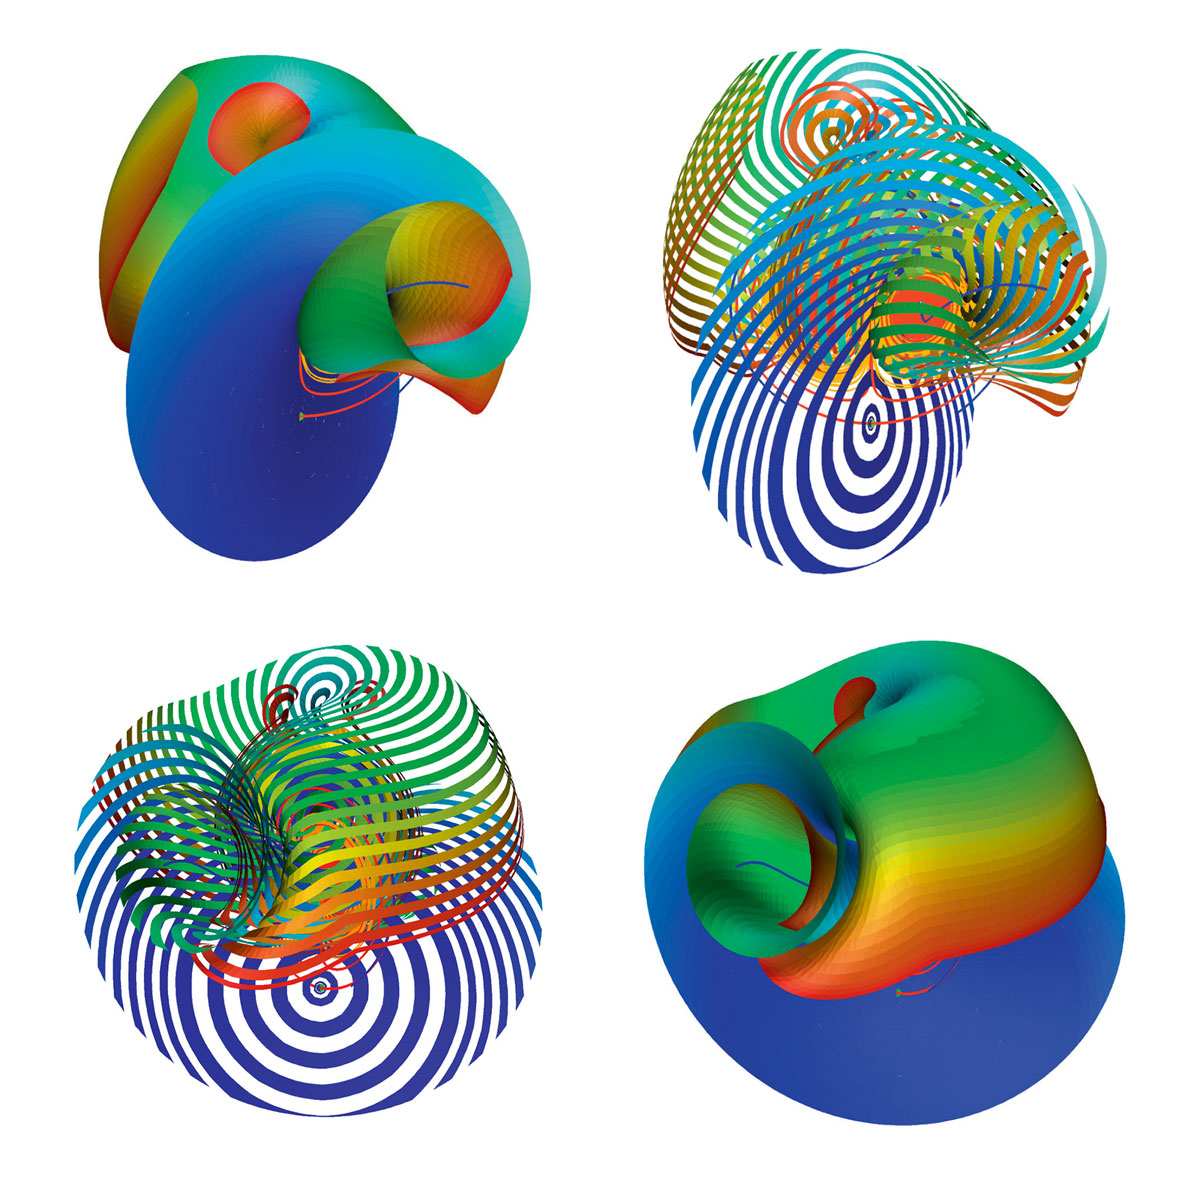 All images above represent details of the Lorenz manifold near the Lorenz attractor. The see-through effect in two of the images is created by showing every other computed band. Reprinted from Computers & Graphics. Courtesy Elsevier.